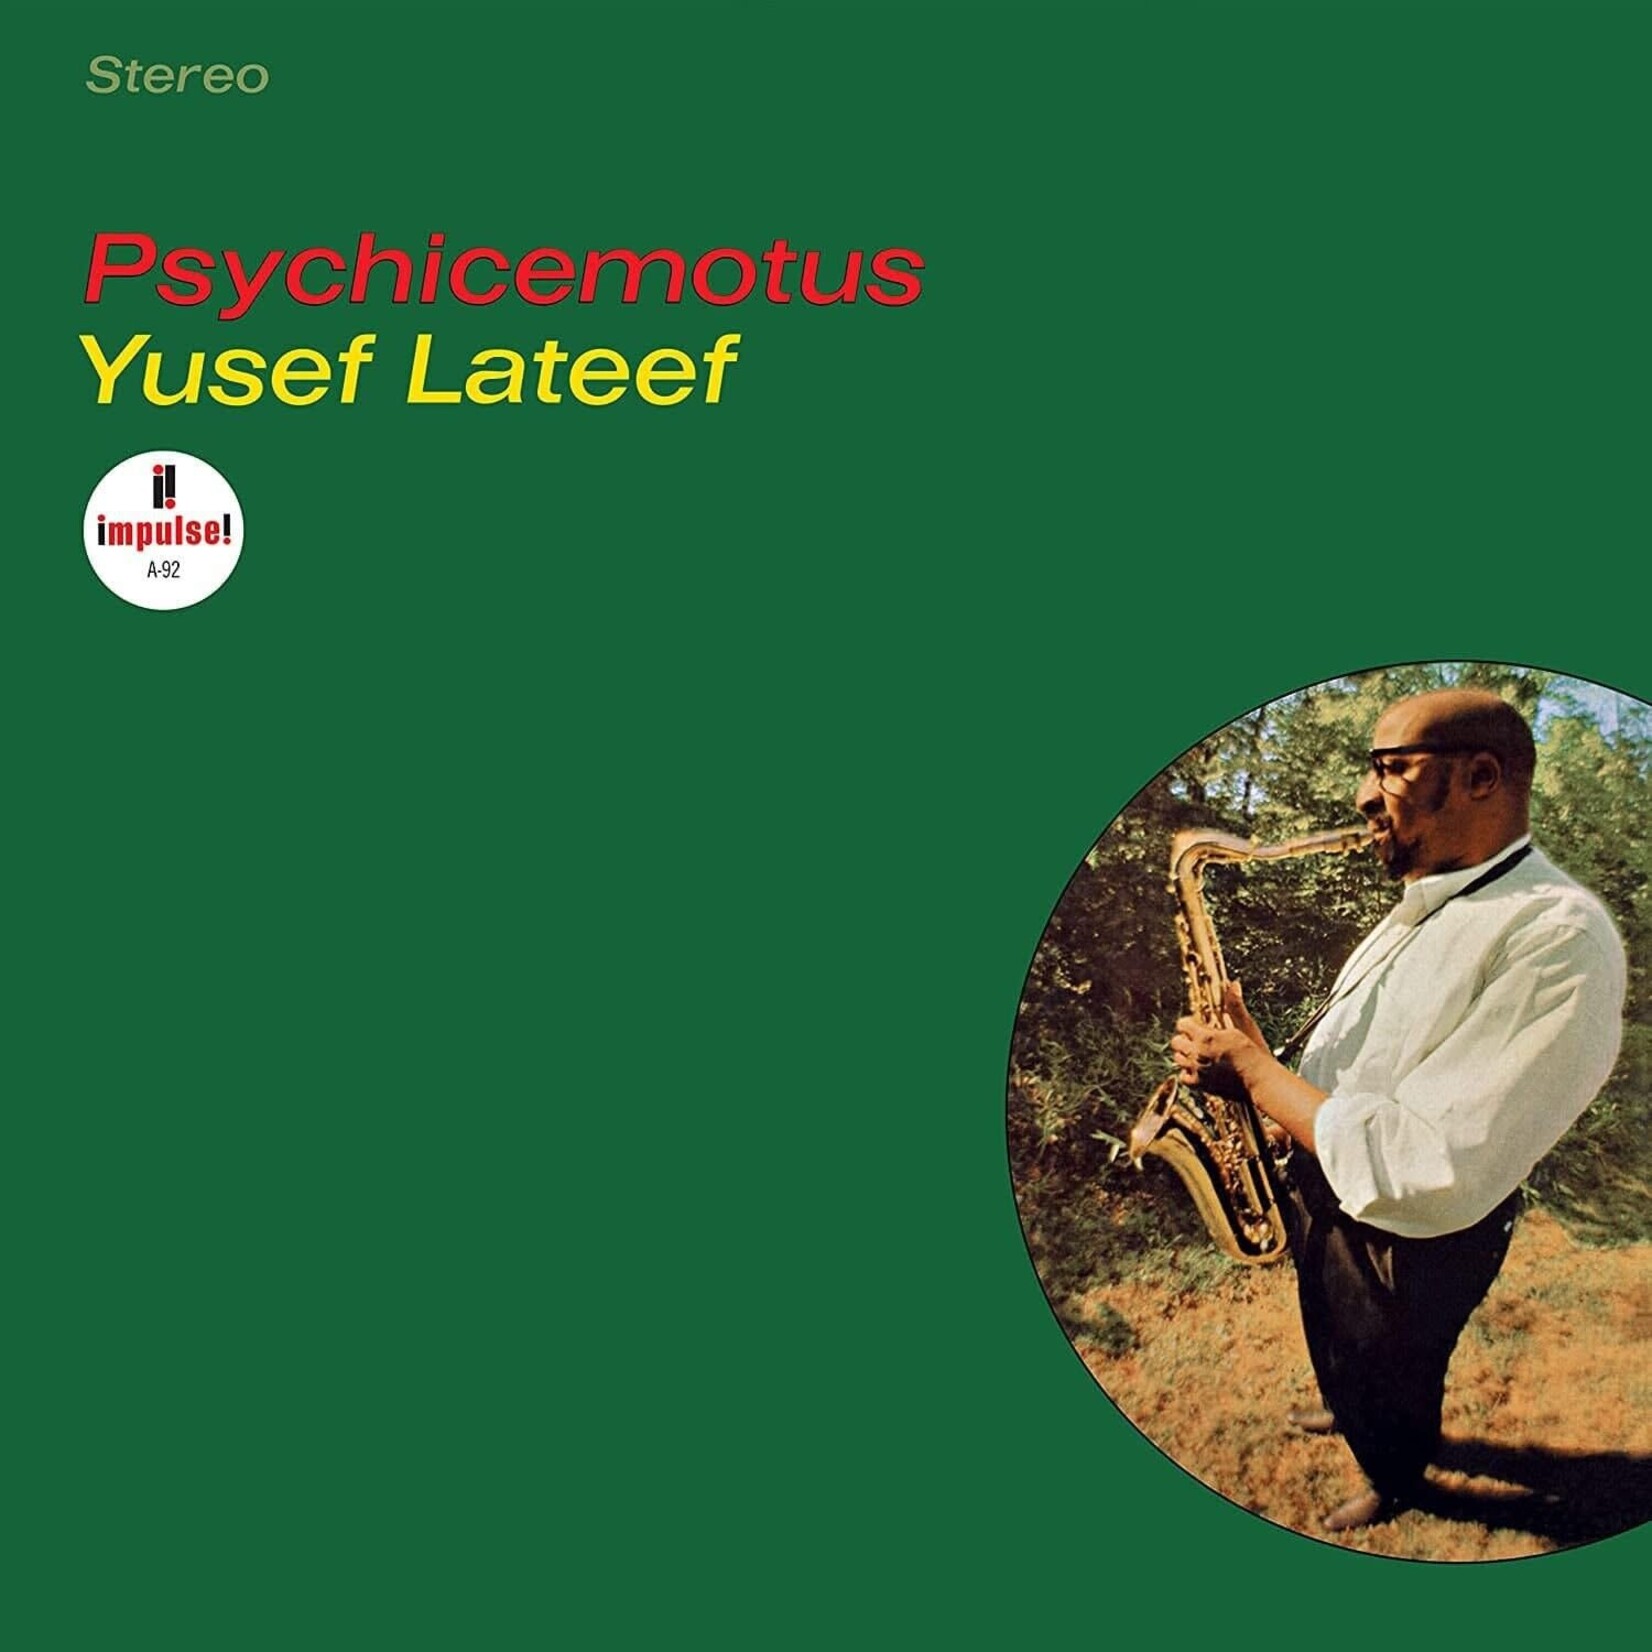 [New] Yusef Lateef - Psychicemotus (Verve By Request series)